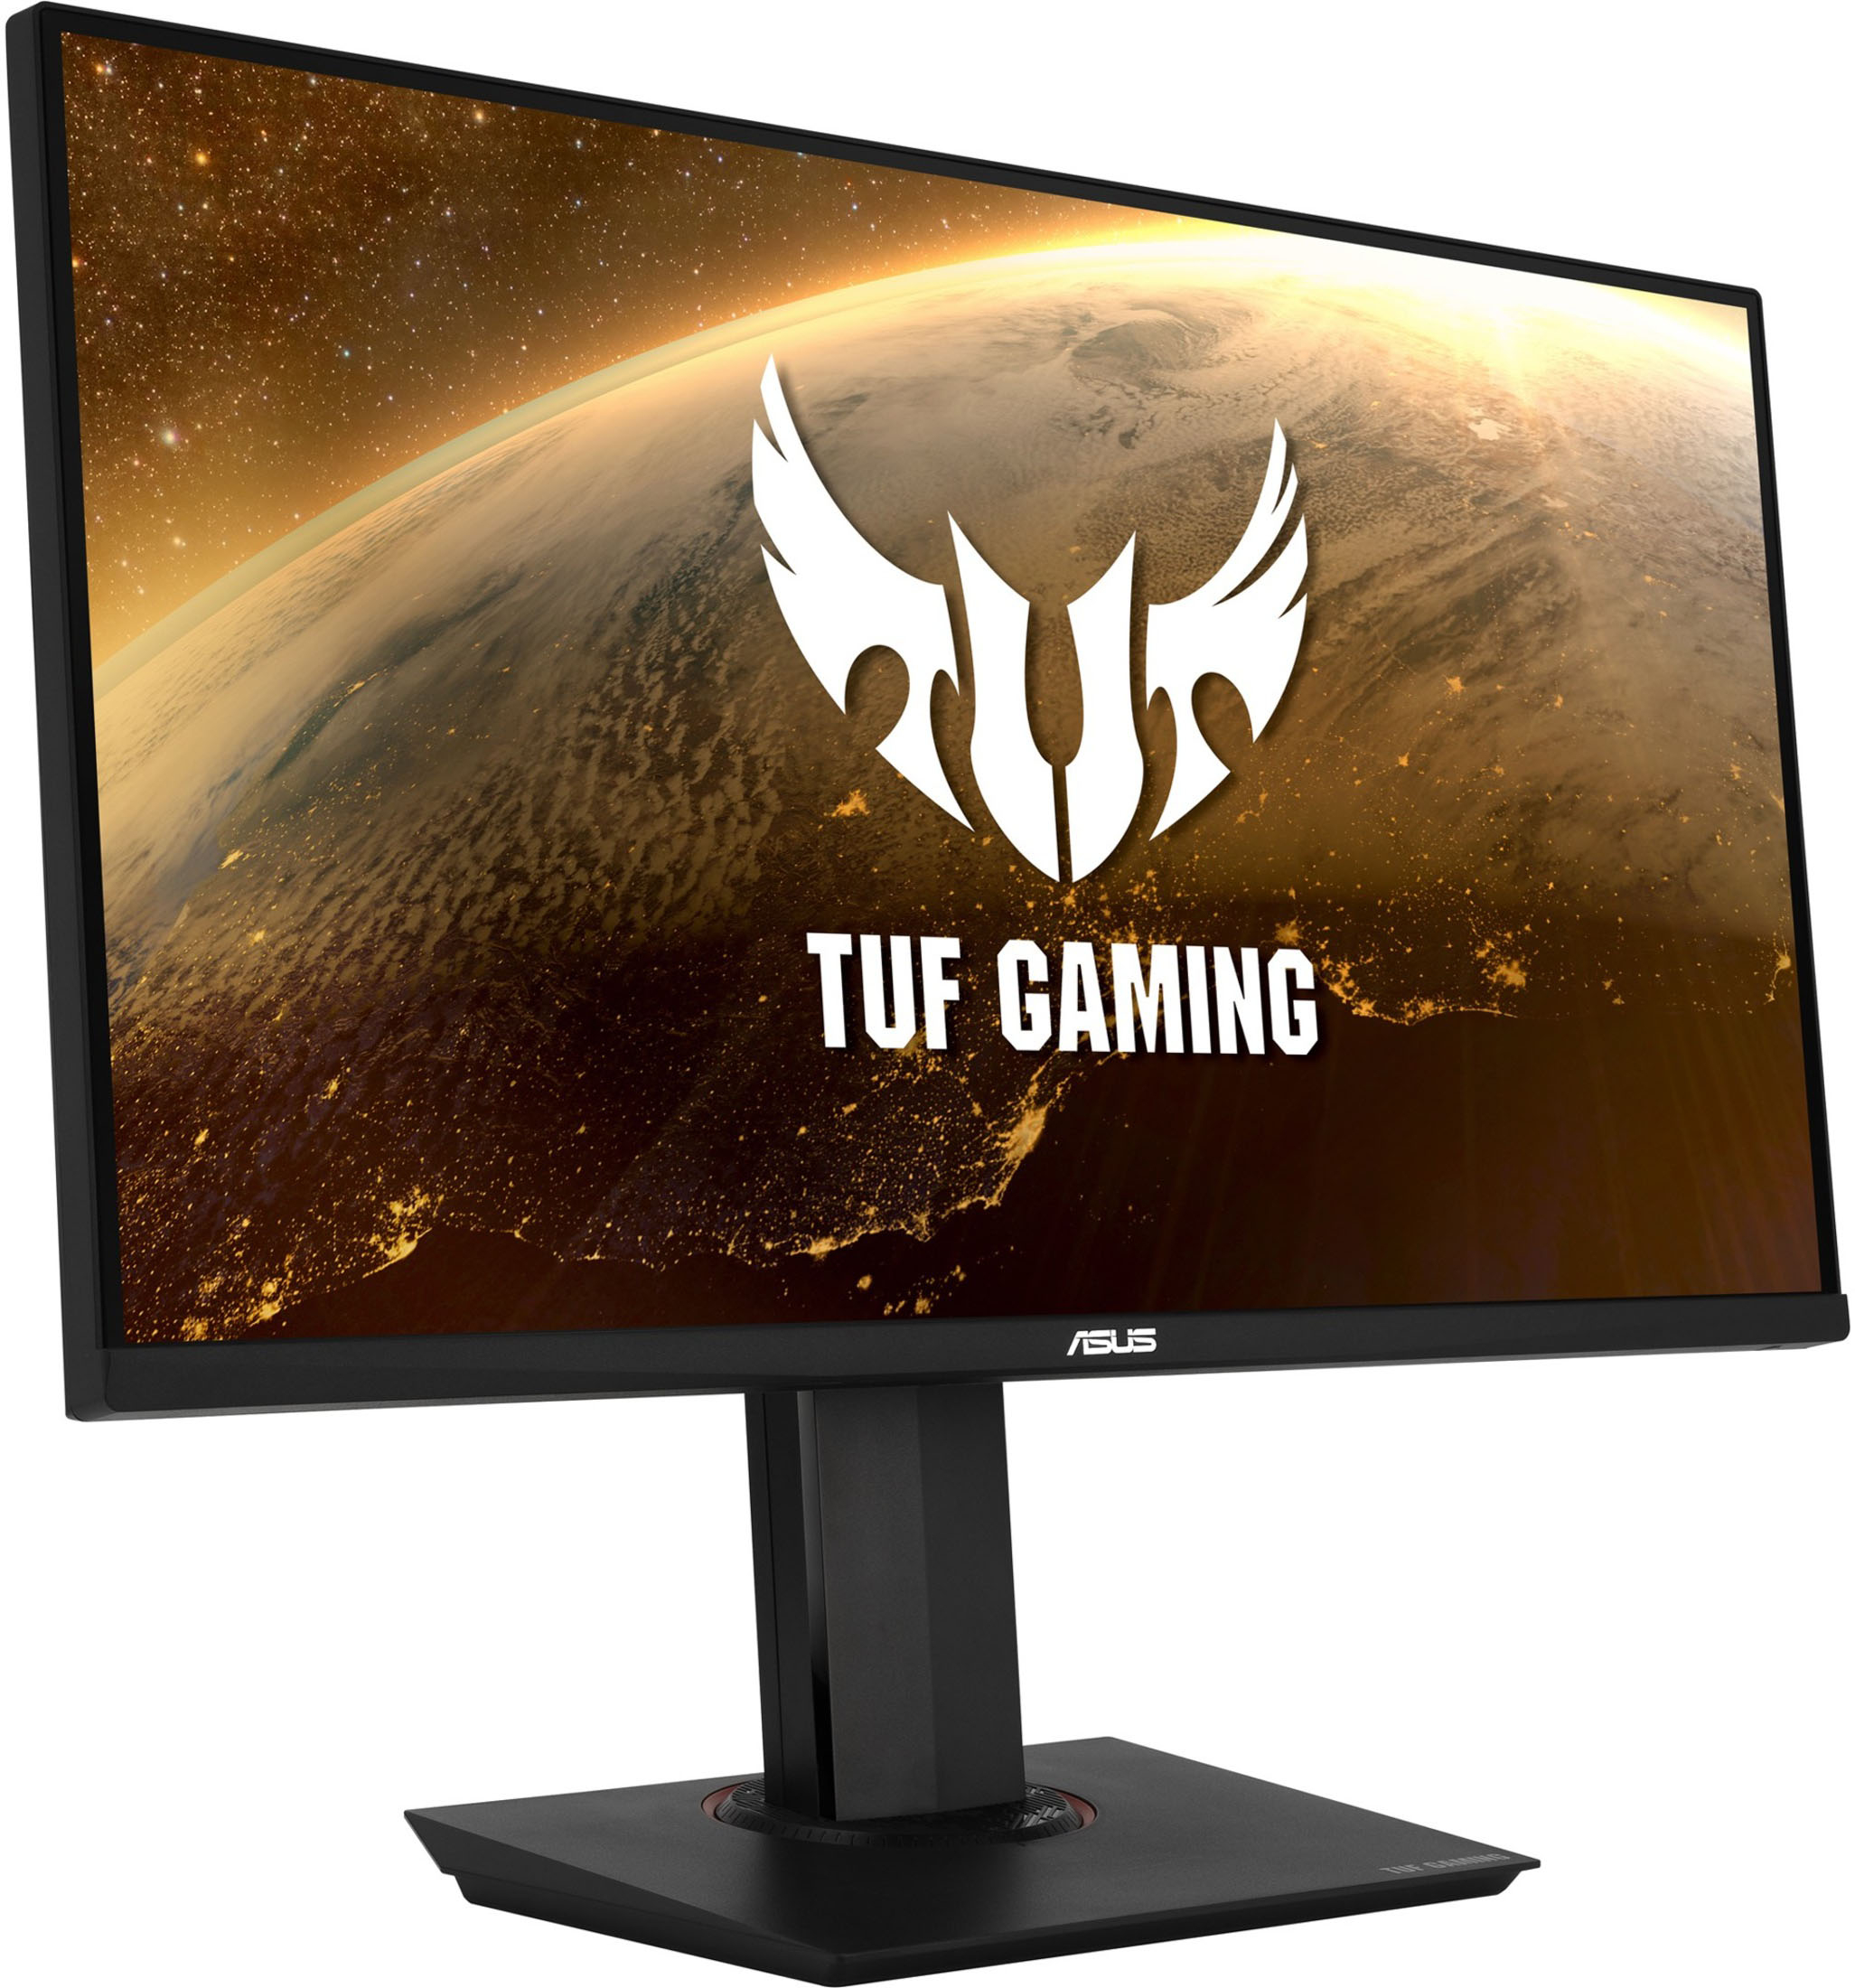 Photo 1 of (DOES NOT TURN ON)28" IPS WLED 4k Gaming Monitor (DisplayPort, HDMI)
**DOES NOT POWER ON**